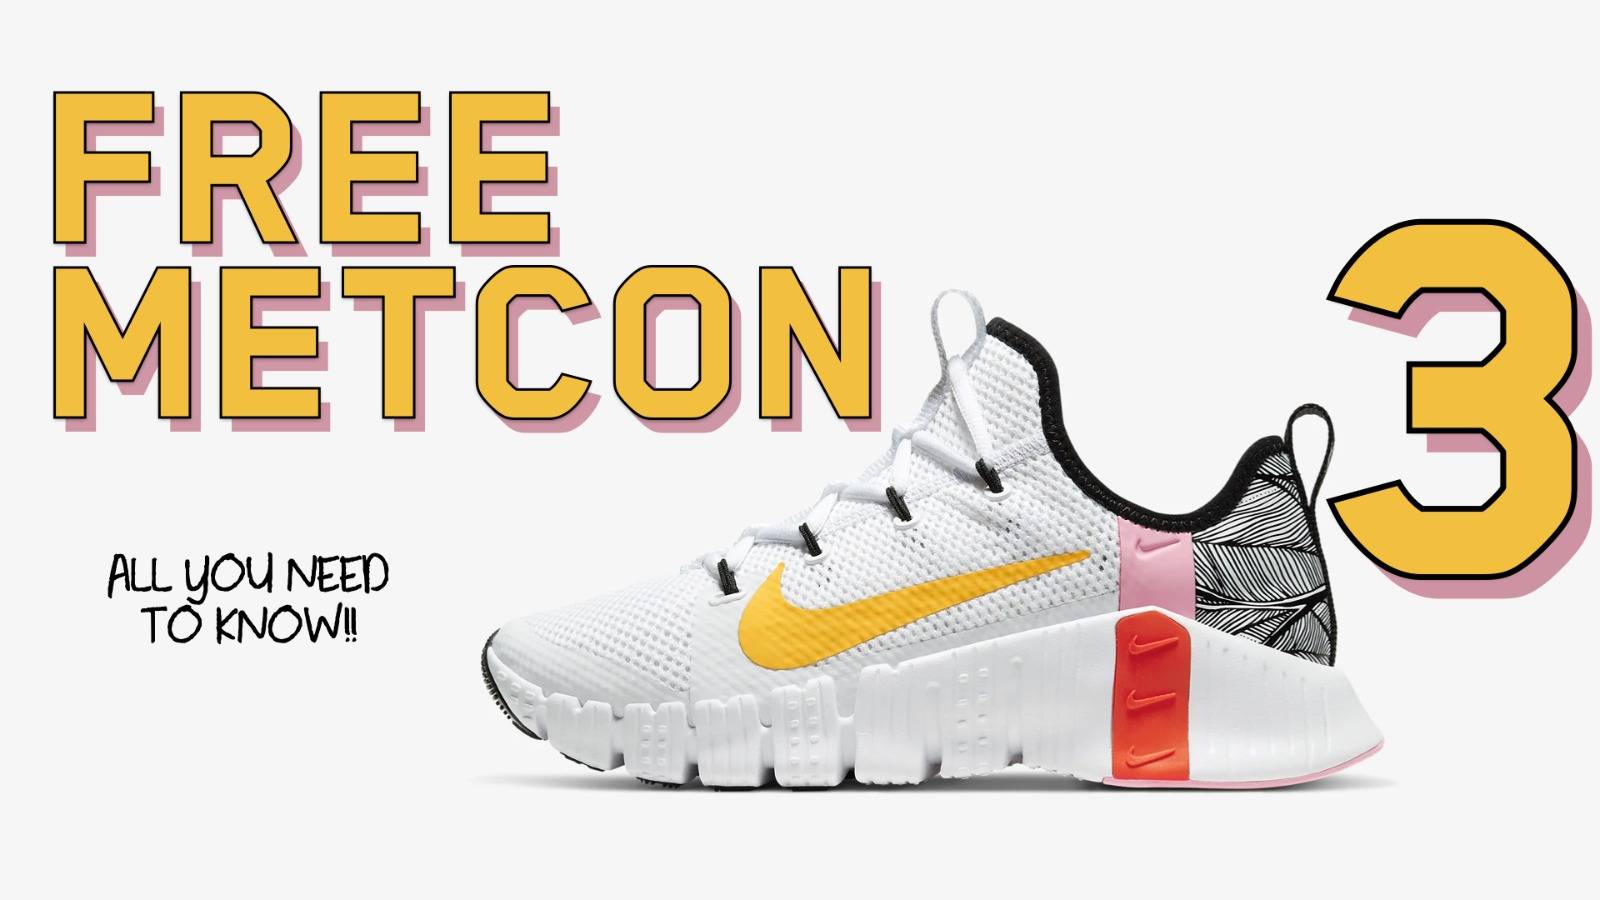 Nike Free Metcon 3 Review: You Need to Know - WIT Fitness